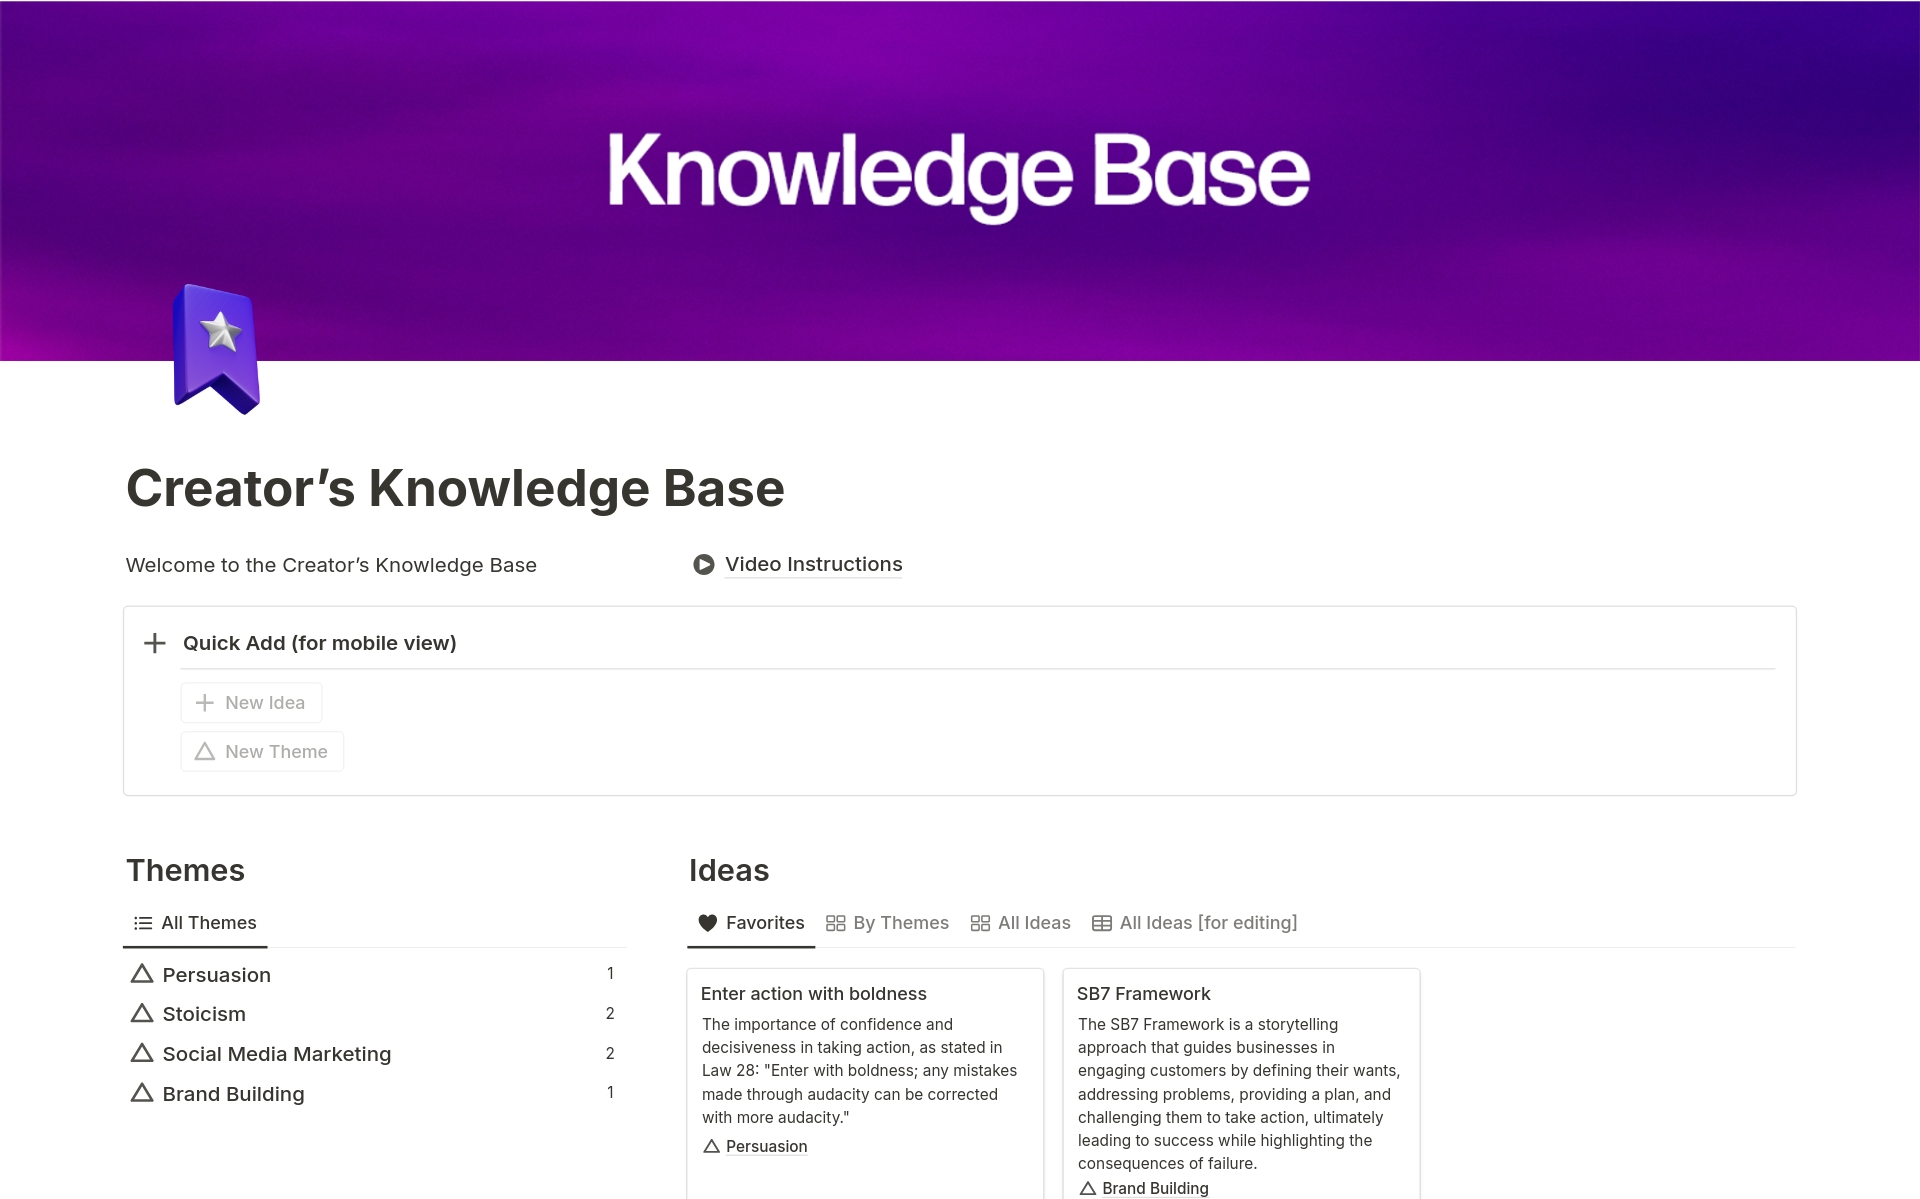 Take the first step into building a system to manage your ideas using Creator's Knowledge Base